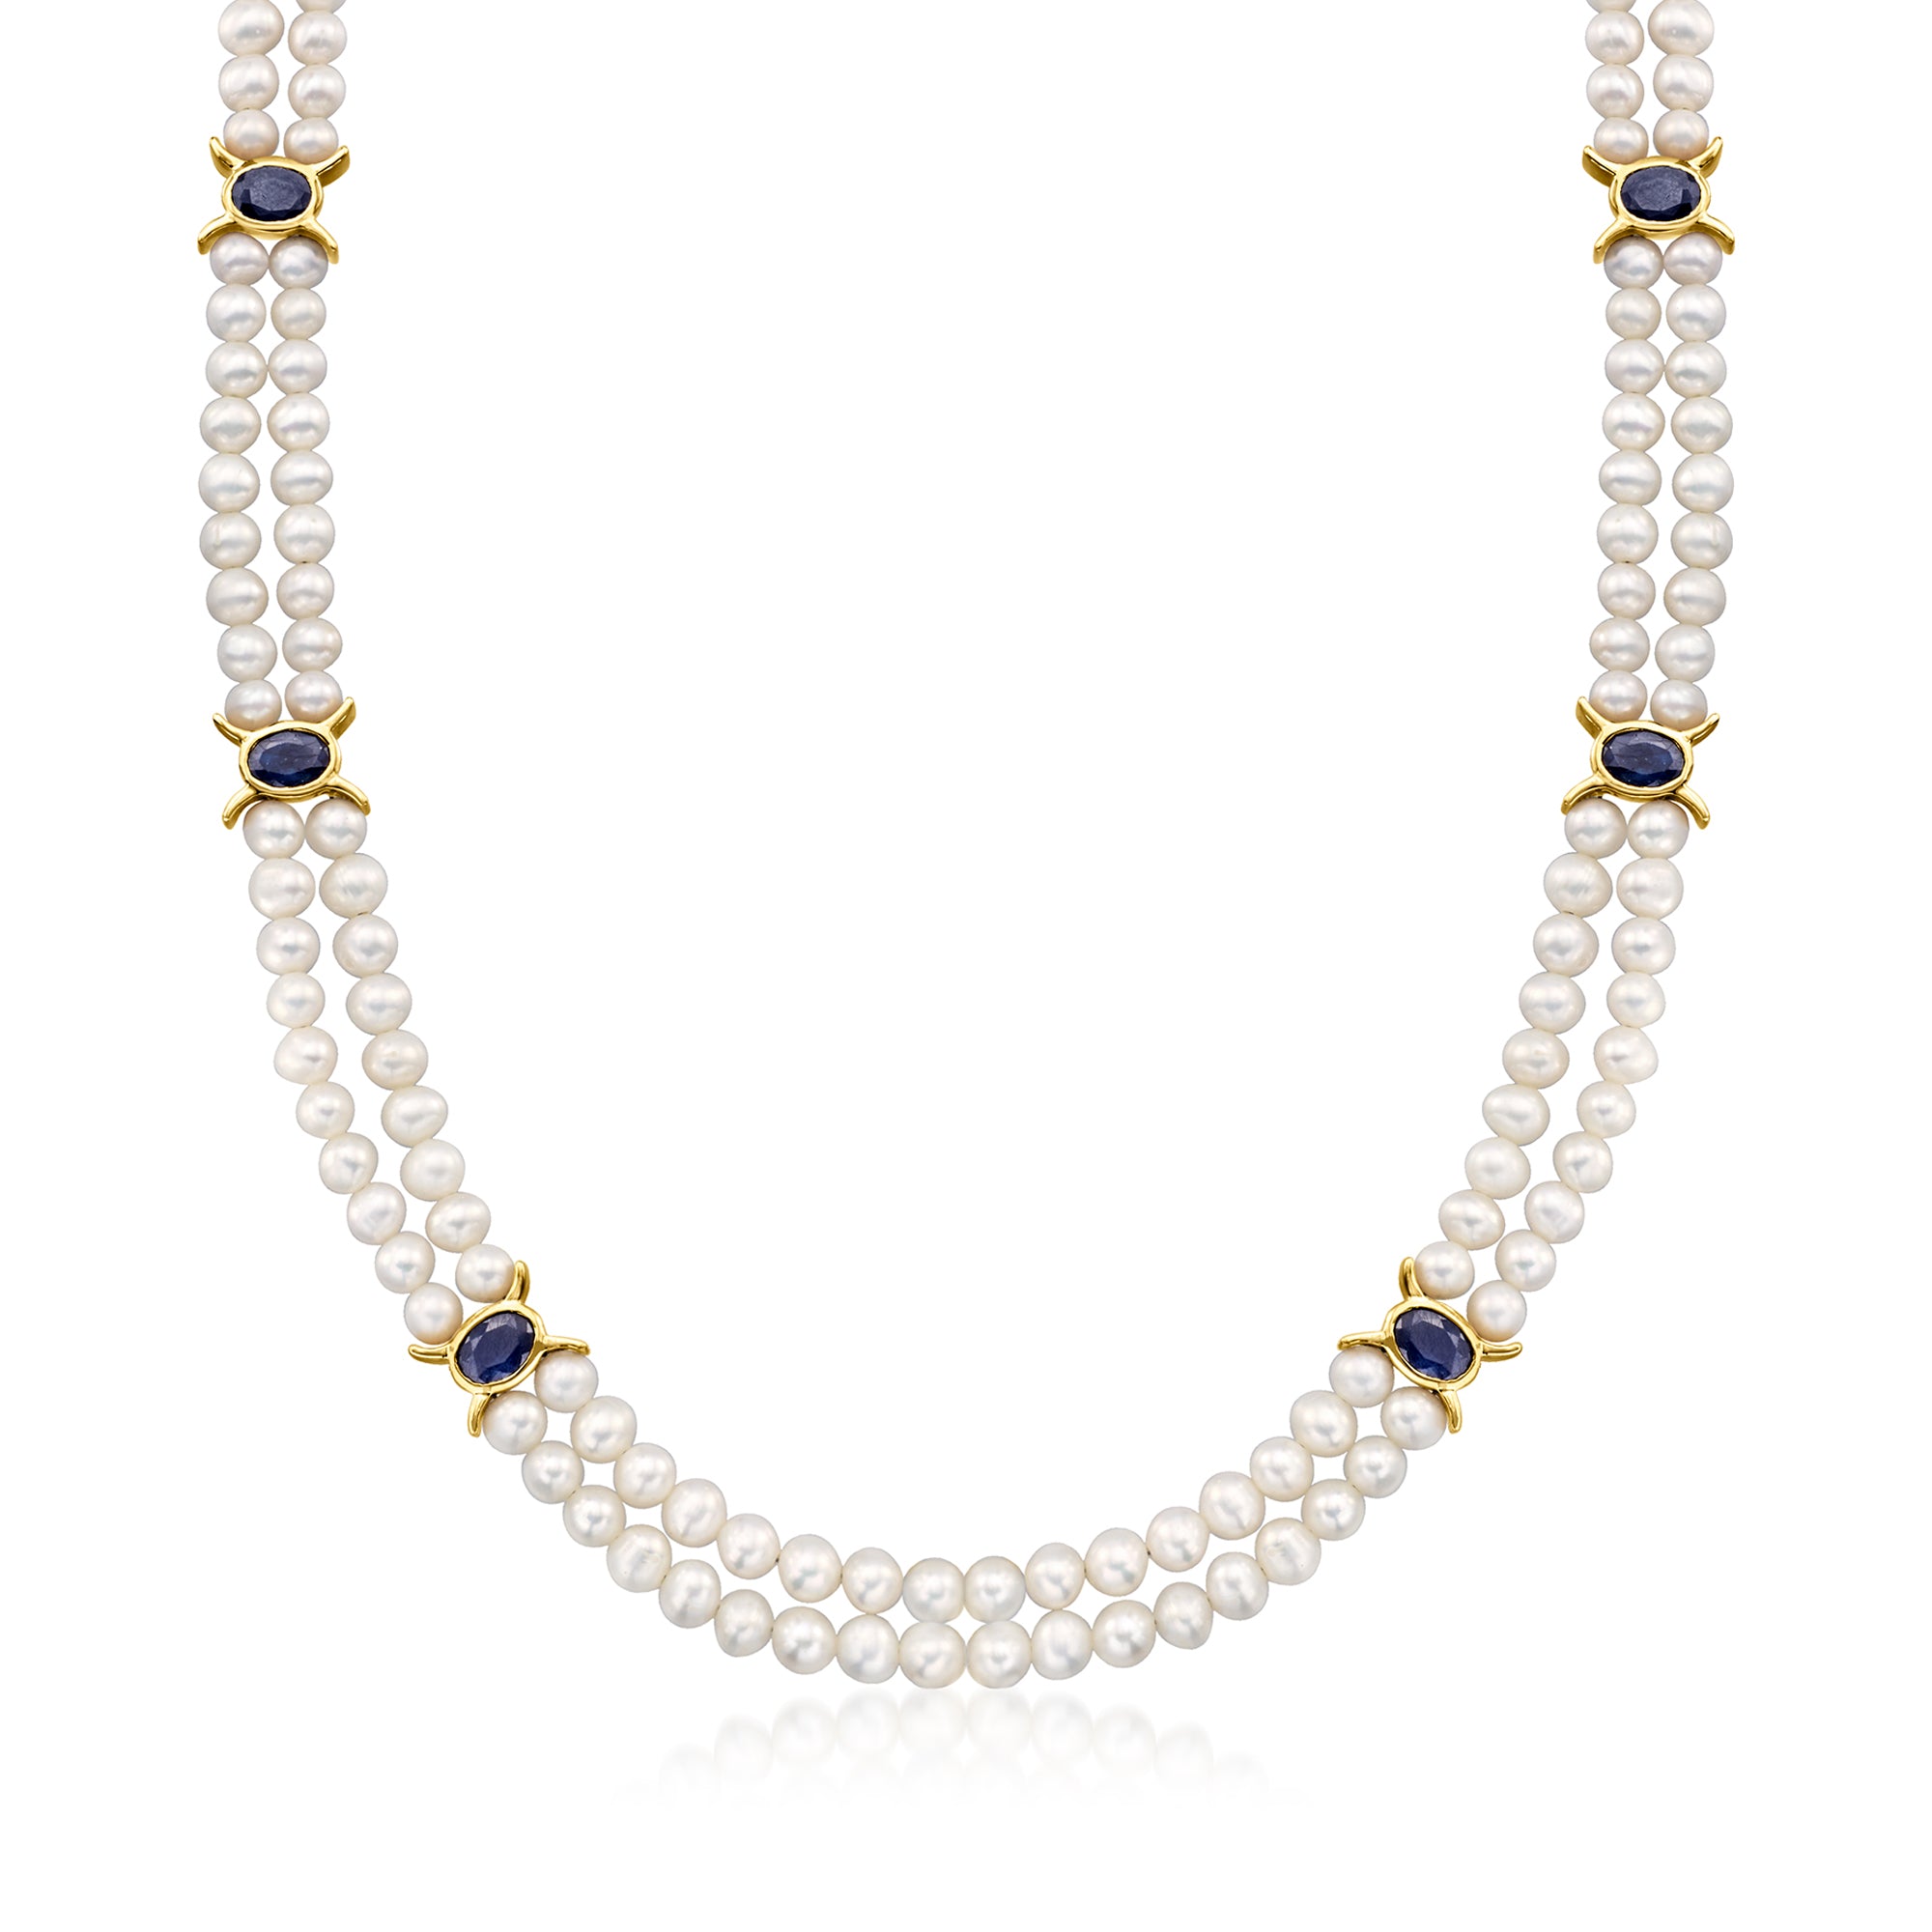 Ross-simons 4.5-5.5mm Cultured Pearl And Sapphire Station Necklace In 18kt Gold Over Sterling In Metallic